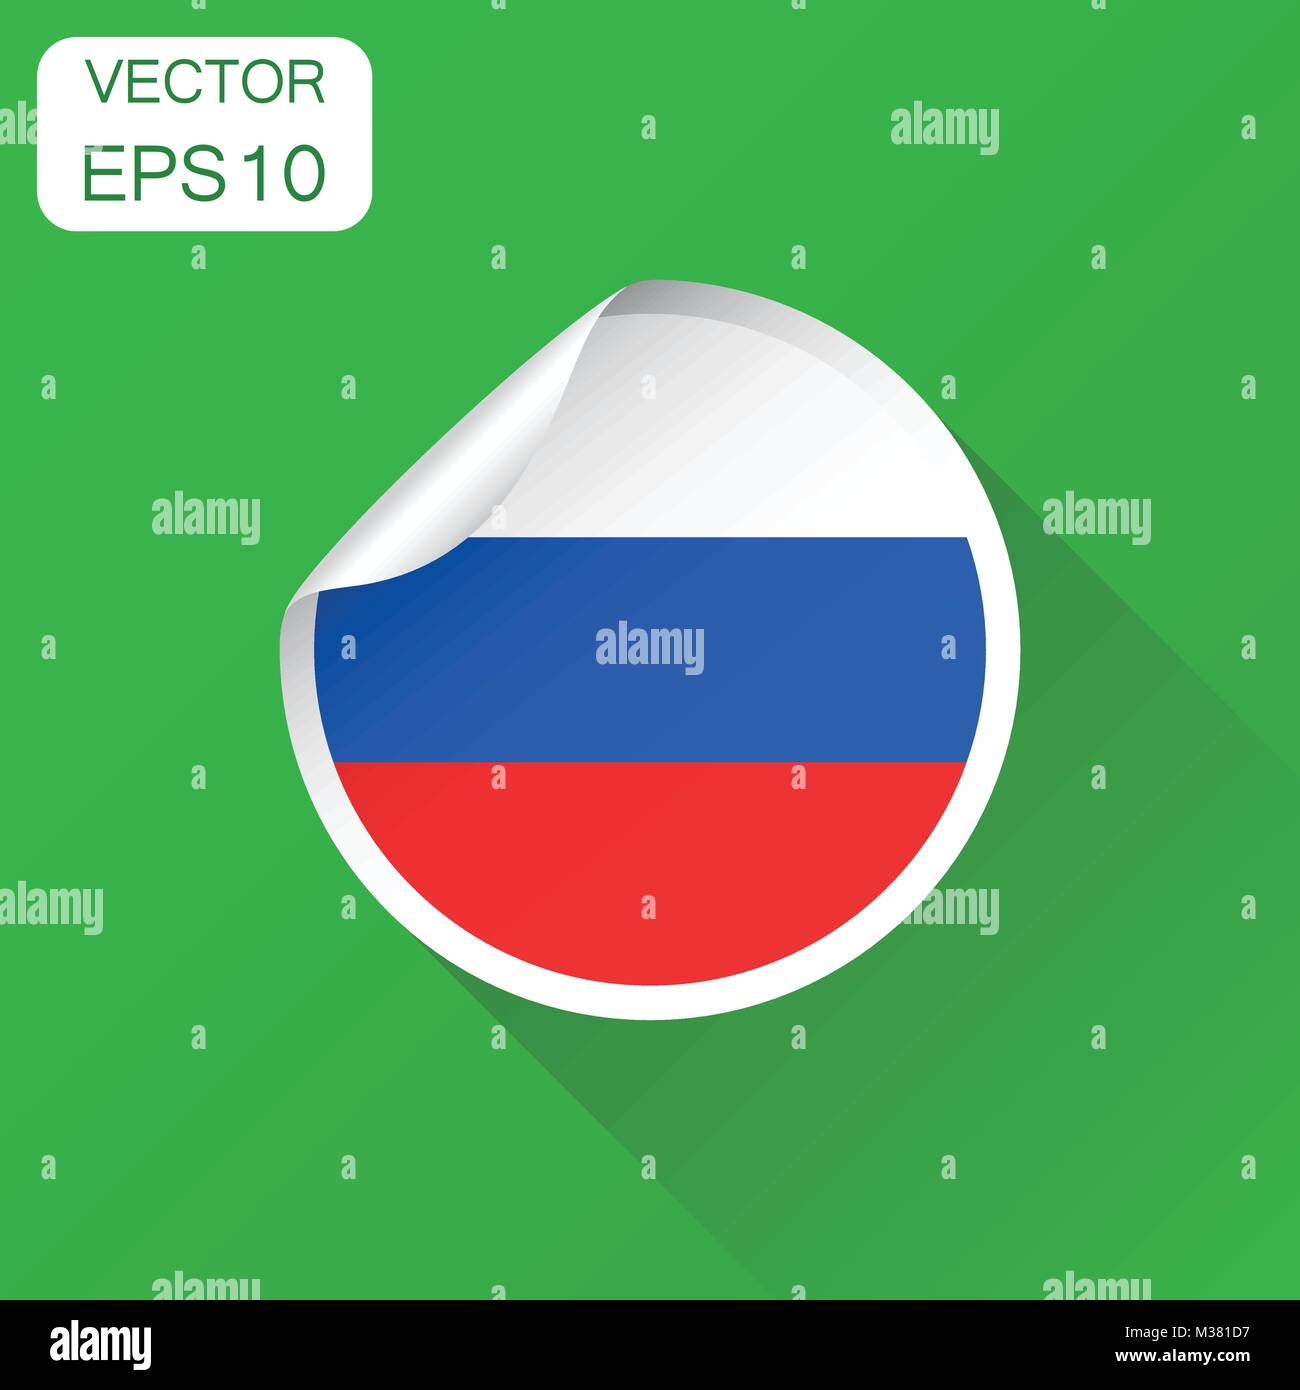 Flag labels. Illustration of flag of Russia